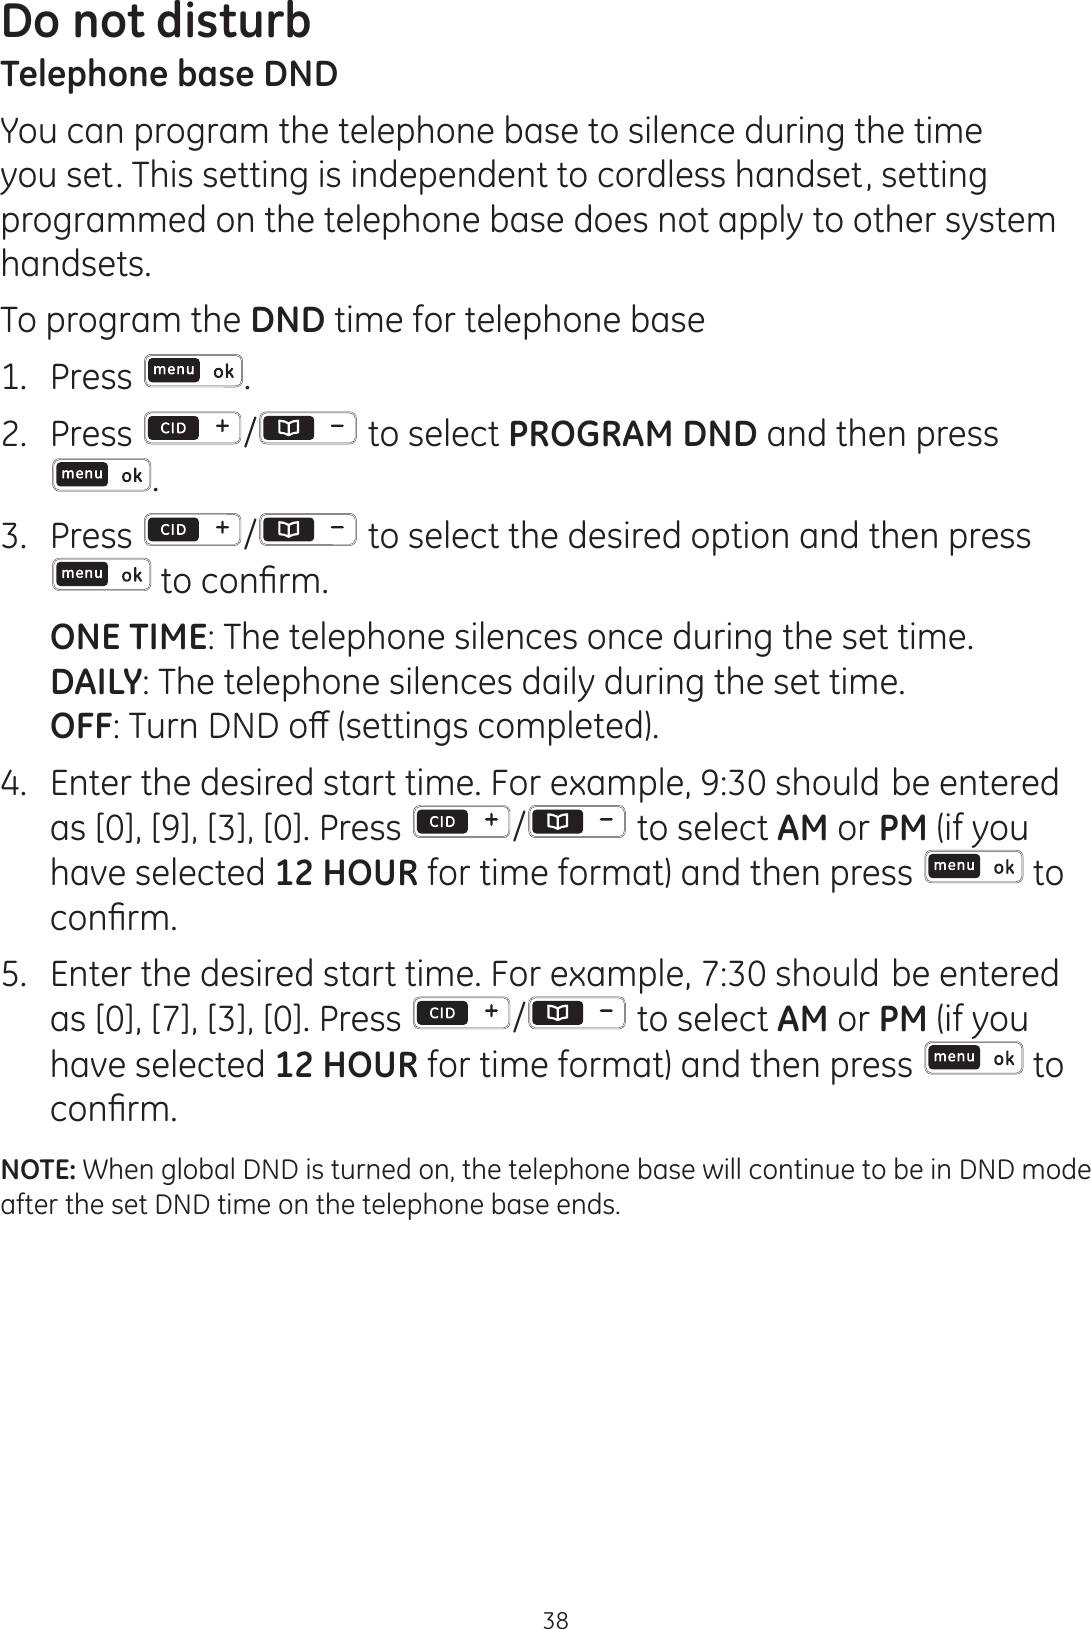 Do not disturb38Telephone base DNDYou can program the telephone base to silence during the time you set. This setting is independent to cordless handset, setting programmed on the telephone base does not apply to other system handsets. To program the DND time for telephone base1.   Press . 2.  Press  /  to select PROGRAM DND and then press  .3.  Press  /  to select the desired option and then press WRFRQ¿UP ONE TIME: The telephone silences once during the set time. DAILY: The telephone silences daily during the set time. OFF7XUQ&apos;1&apos;RȺVHWWLQJVFRPSOHWHG4. Enter the desired start time. For example, 9:30 should be entered as [0], [9], [3], [0]. Press  /  to select AM or PM (if you have selected 12 HOUR for time format) and then press   to FRQ¿UP5.  Enter the desired start time. For example, 7:30 should be entered as [0], [7], [3], [0]. Press  /  to select AM or PM (if you have selected 12 HOUR for time format) and then press   to FRQ¿UPNOTE: When global DND is turned on, the telephone base will continue to be in DND mode  after the set DND time on the telephone base ends.